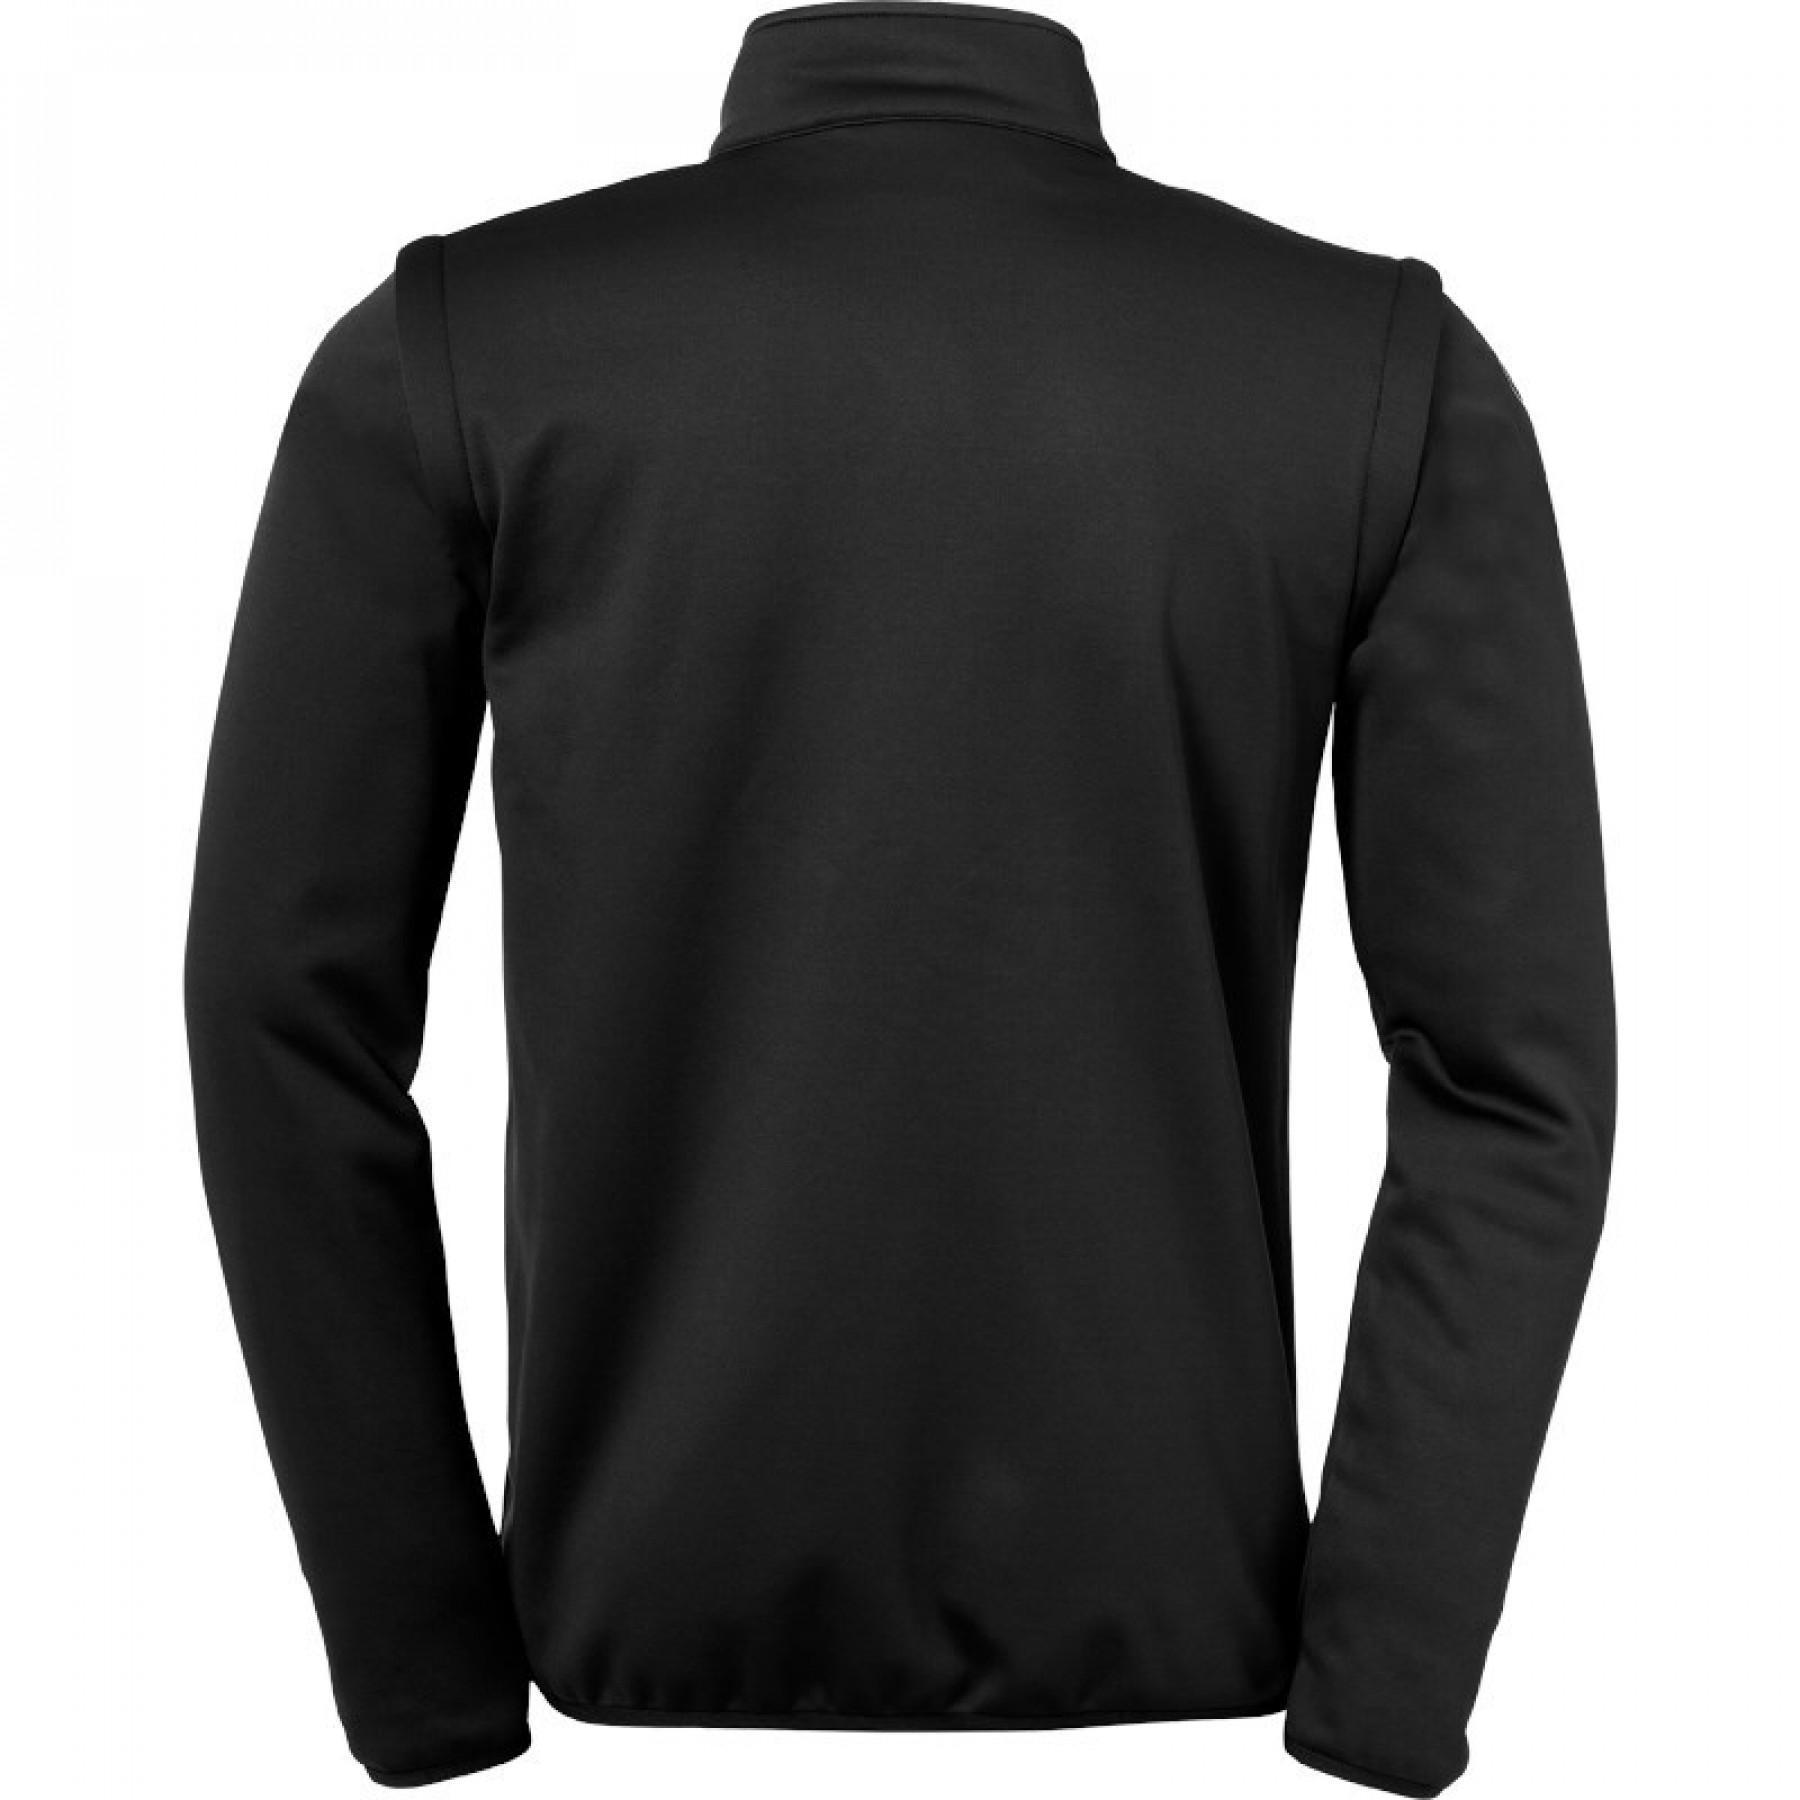 Jacket with removable sleeves Uhlsport Essential